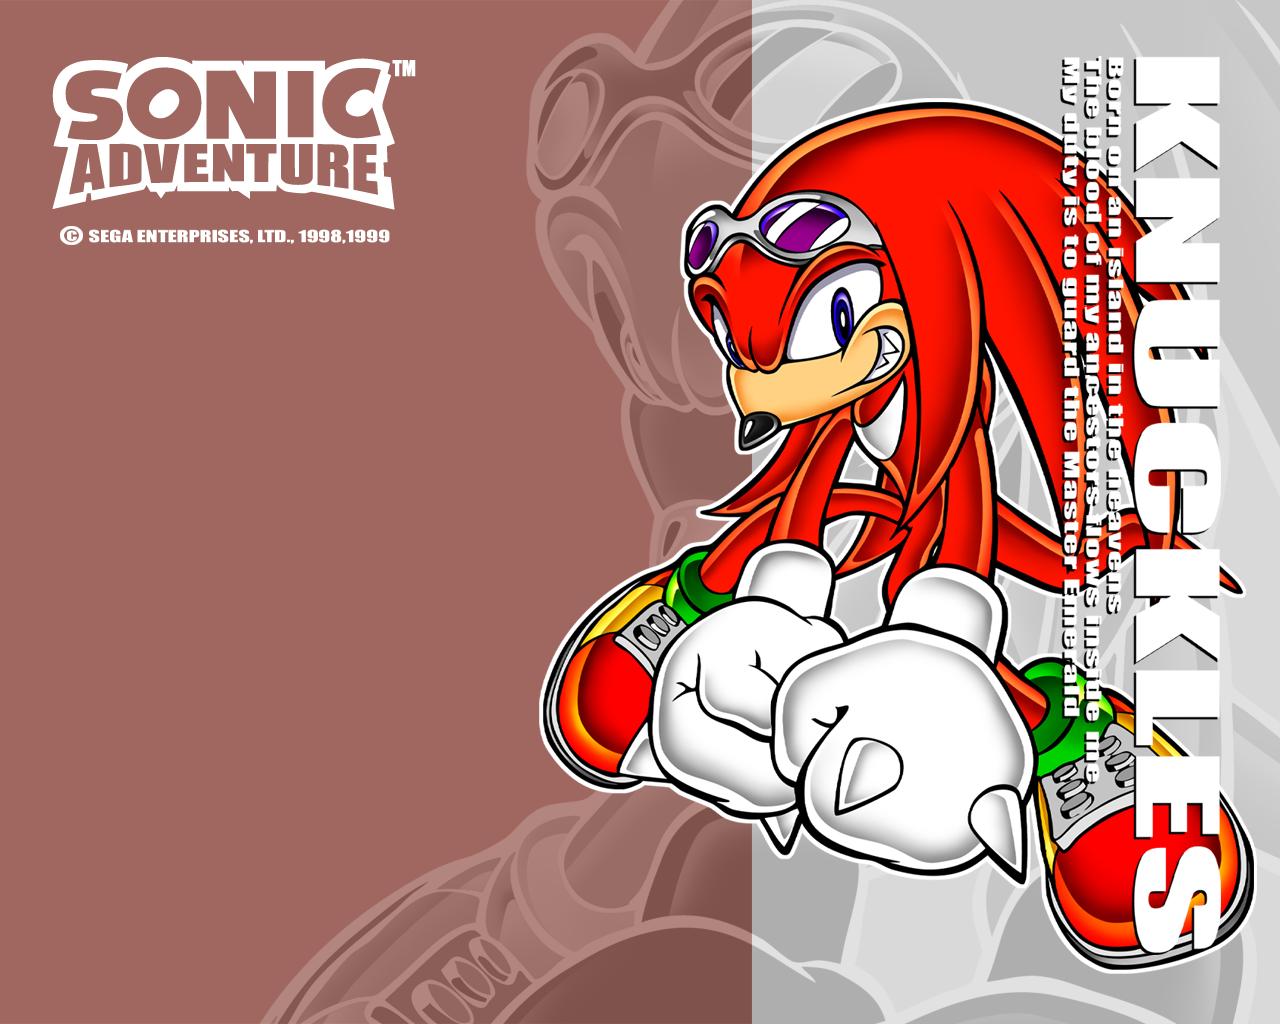 http://www.powersonic.com.br/downloads/papeis/sadx/knuckles.jpg